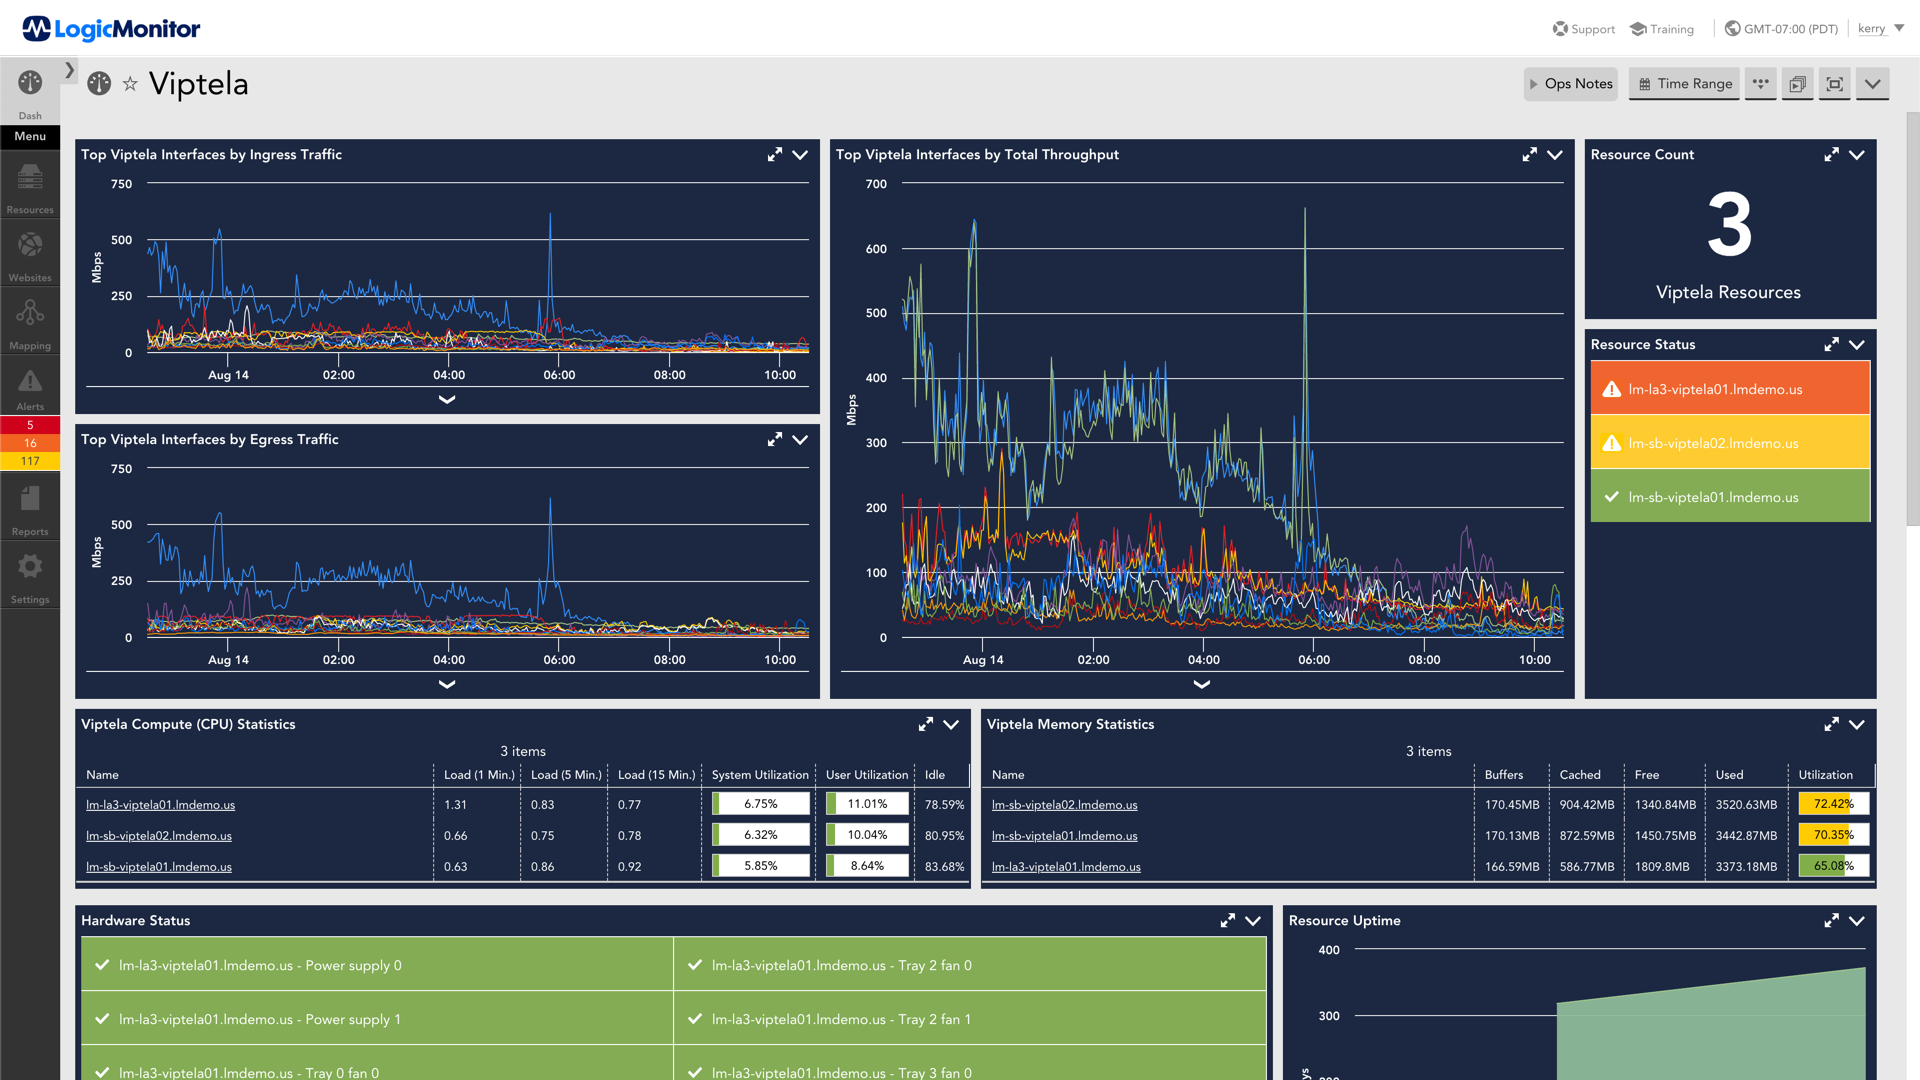 Example Viptela dashboard in LogicMonitor.